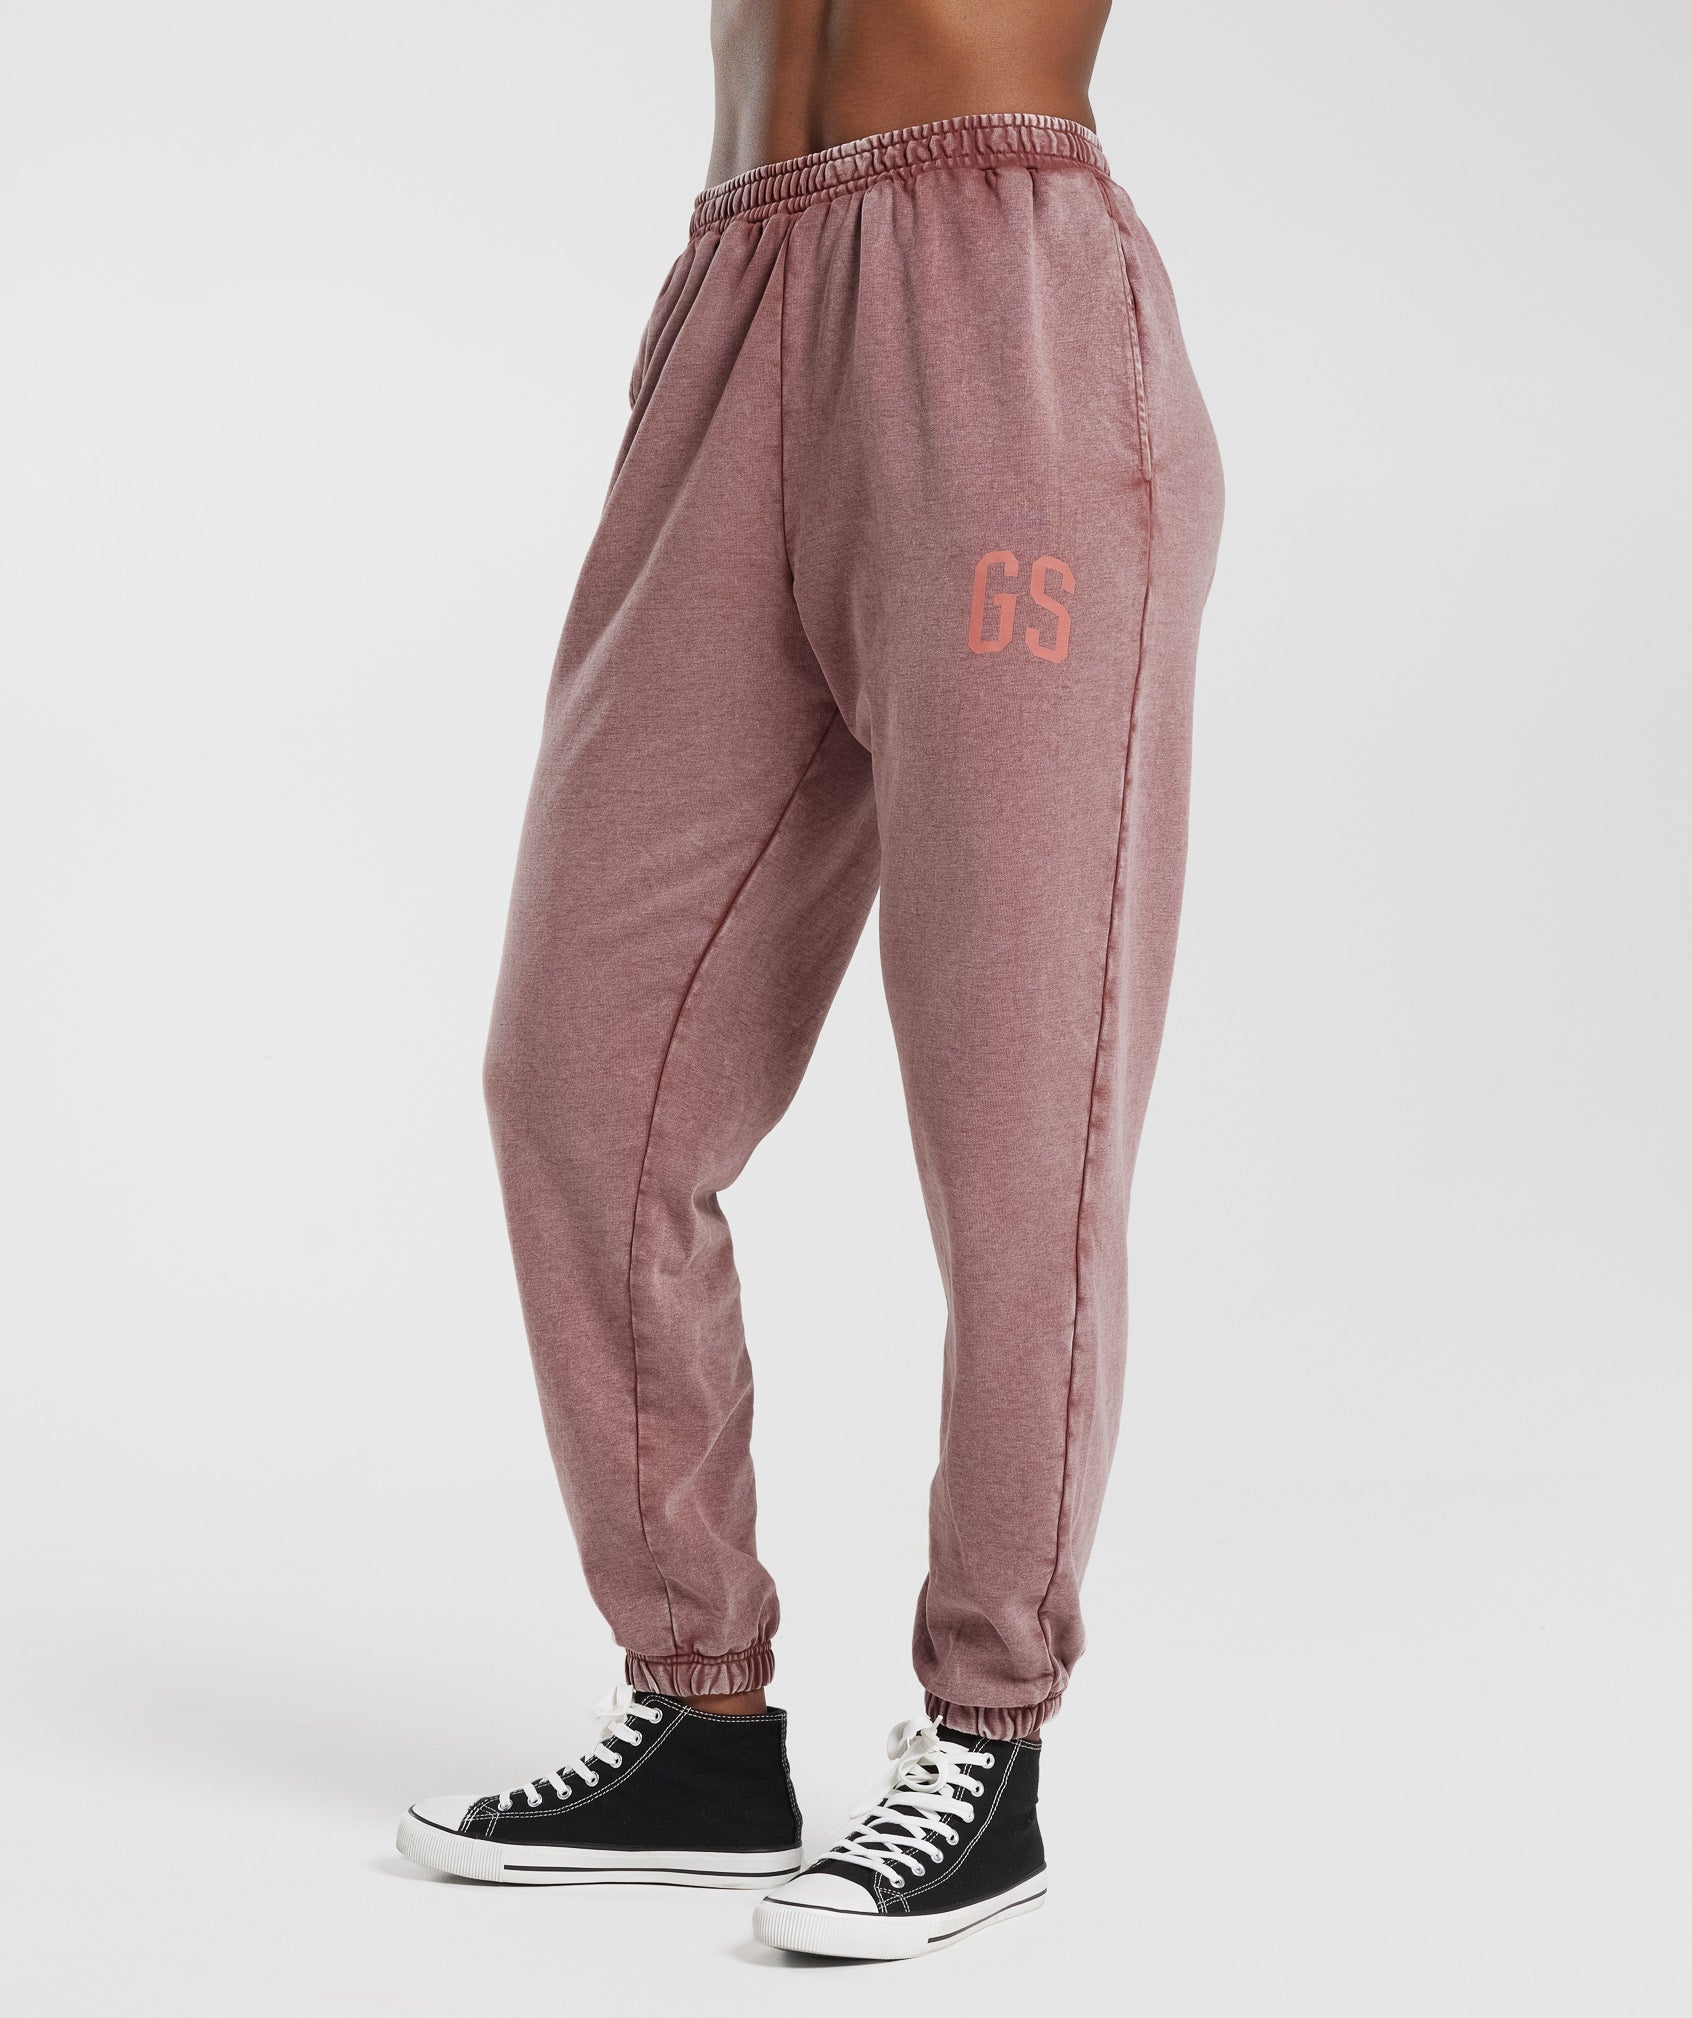 Collegiate Joggers in Dusty Maroon - view 3